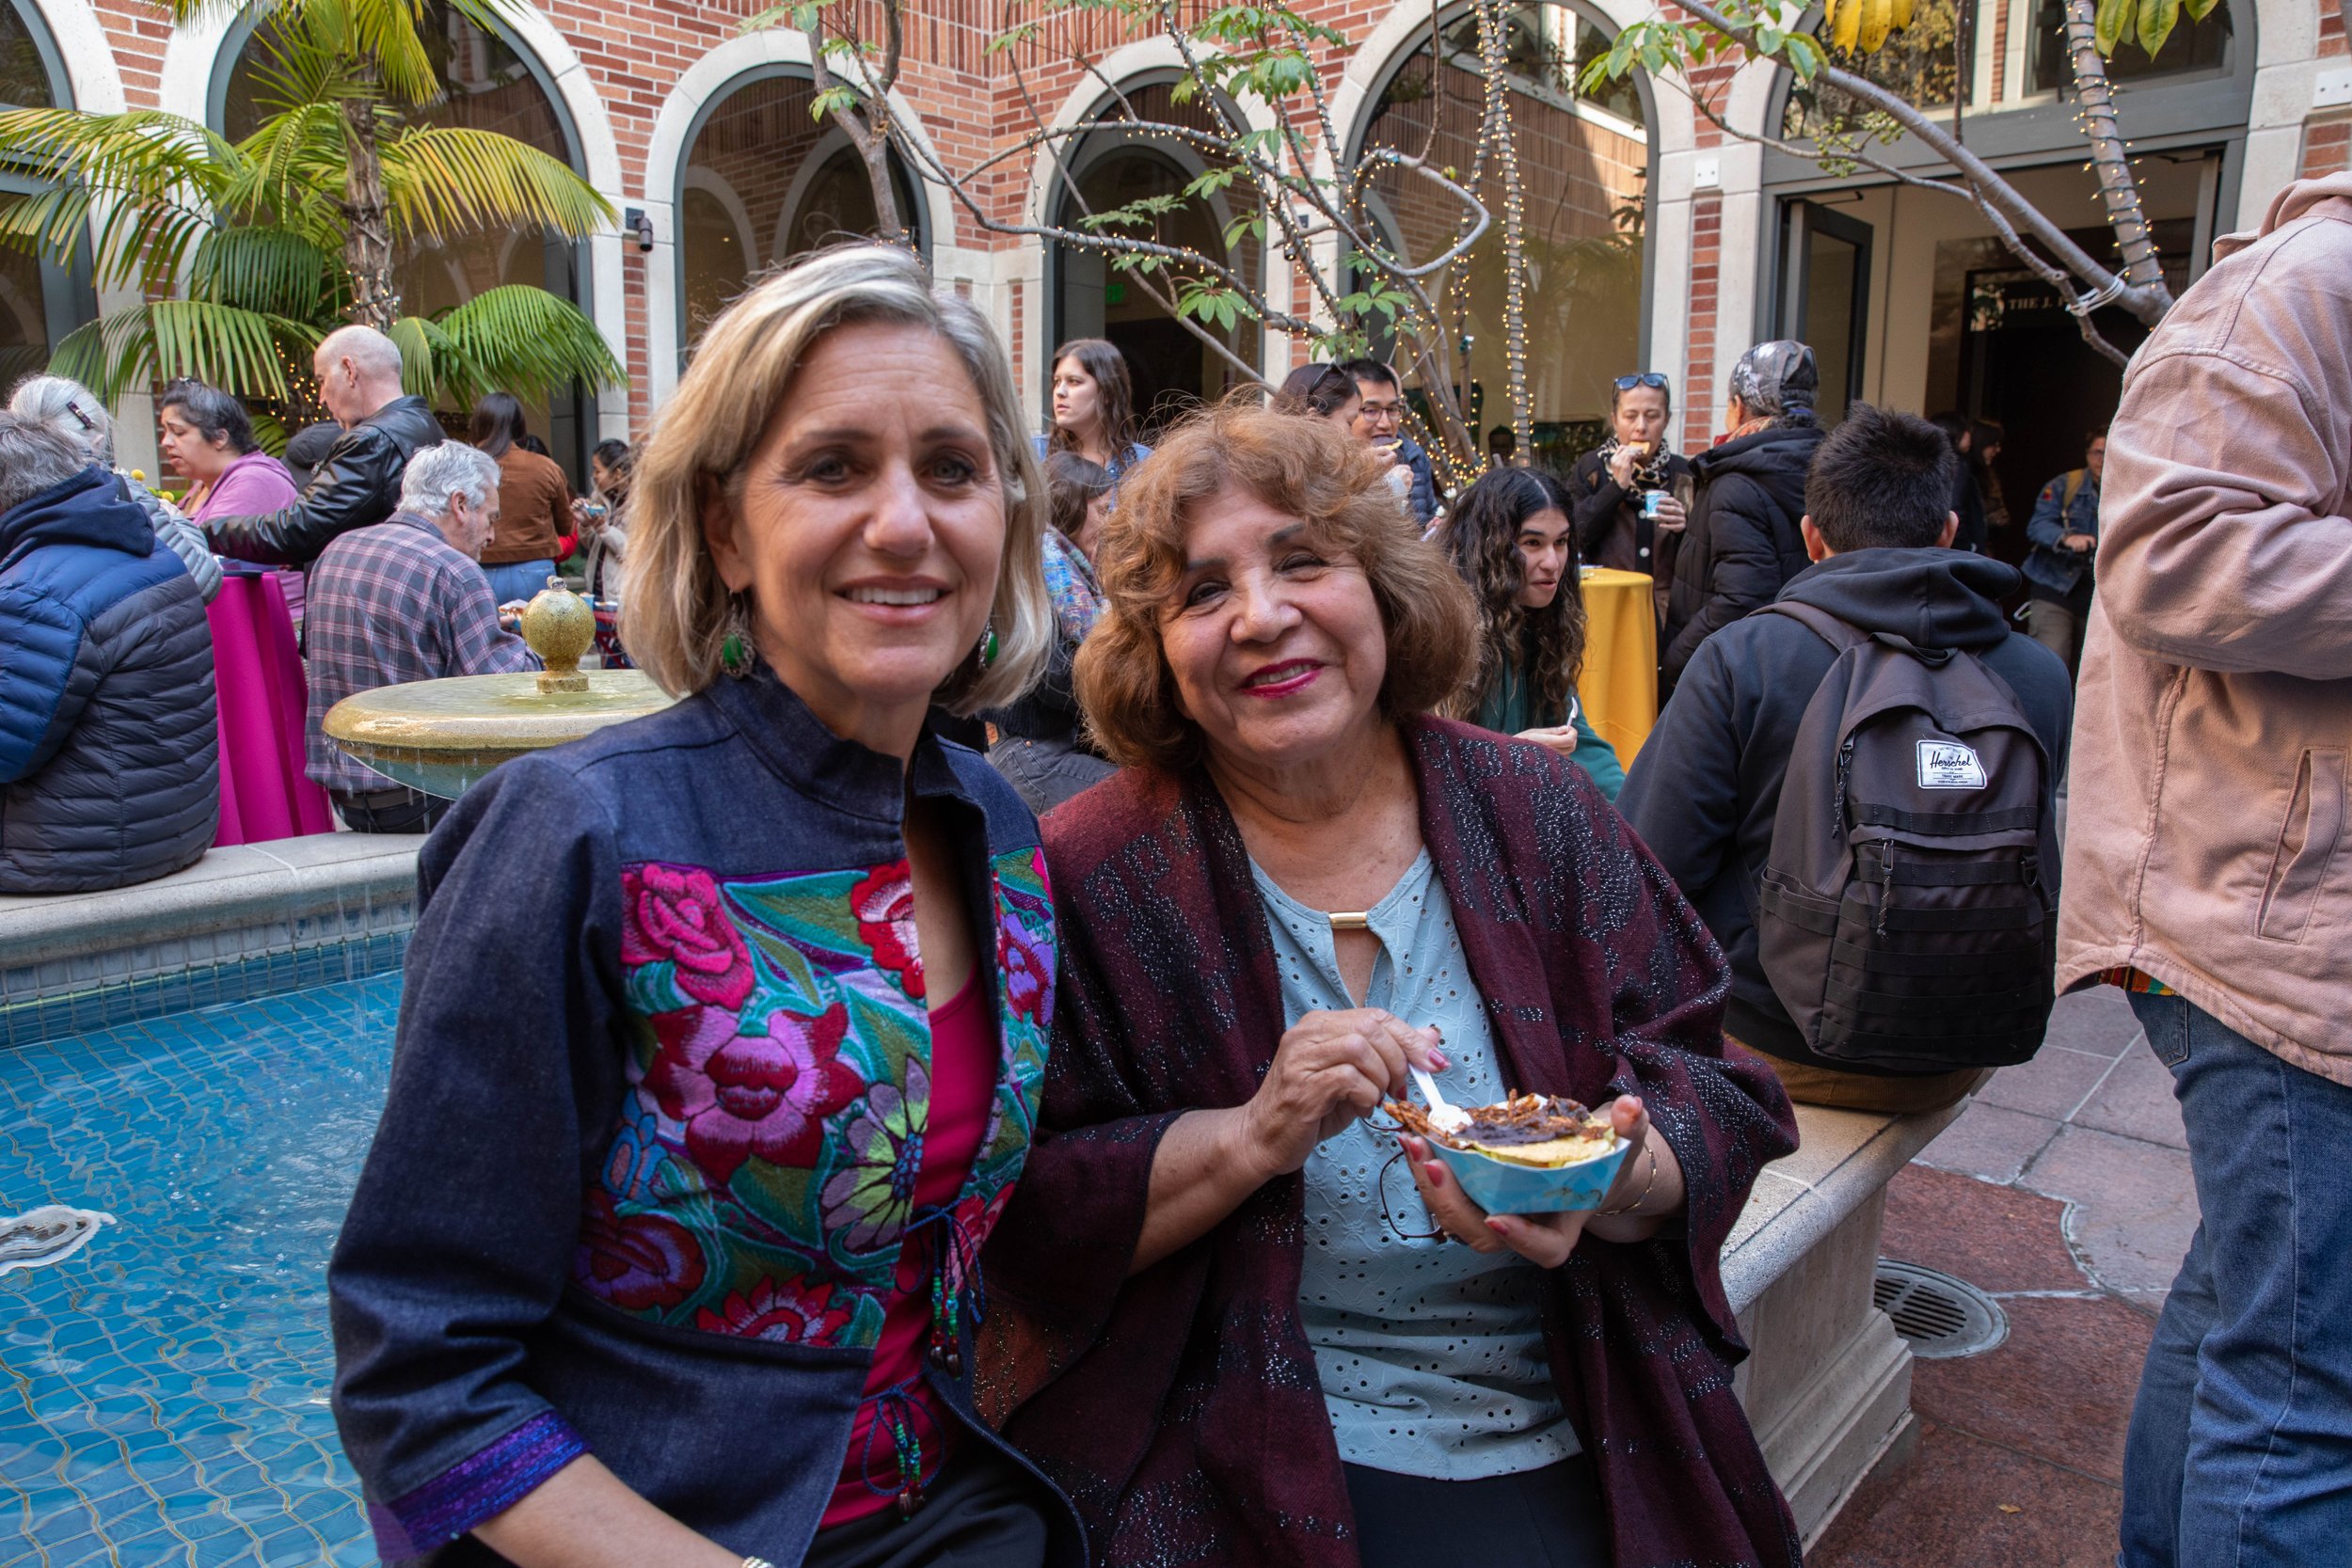  Producer and Director Sarah Portnoy next to abuelita Yolanda Baza, featured in the movie, at the reception after the screening of the documentary “Abuelita’s Kitchen: Mexican Food Stories” inside the Fowler Museum at UCLA main campus, Calif. March, 